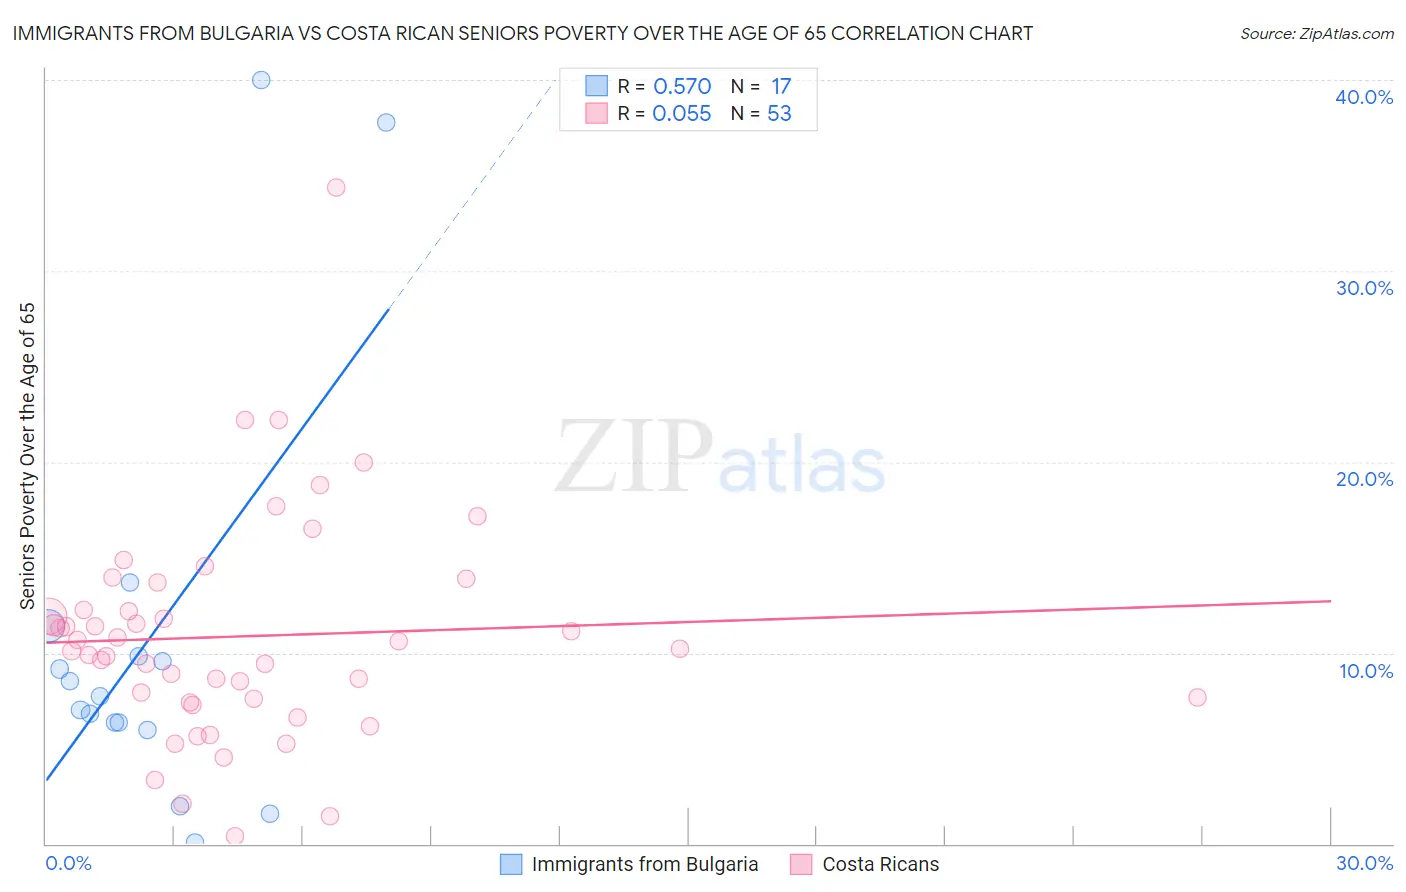 Immigrants from Bulgaria vs Costa Rican Seniors Poverty Over the Age of 65